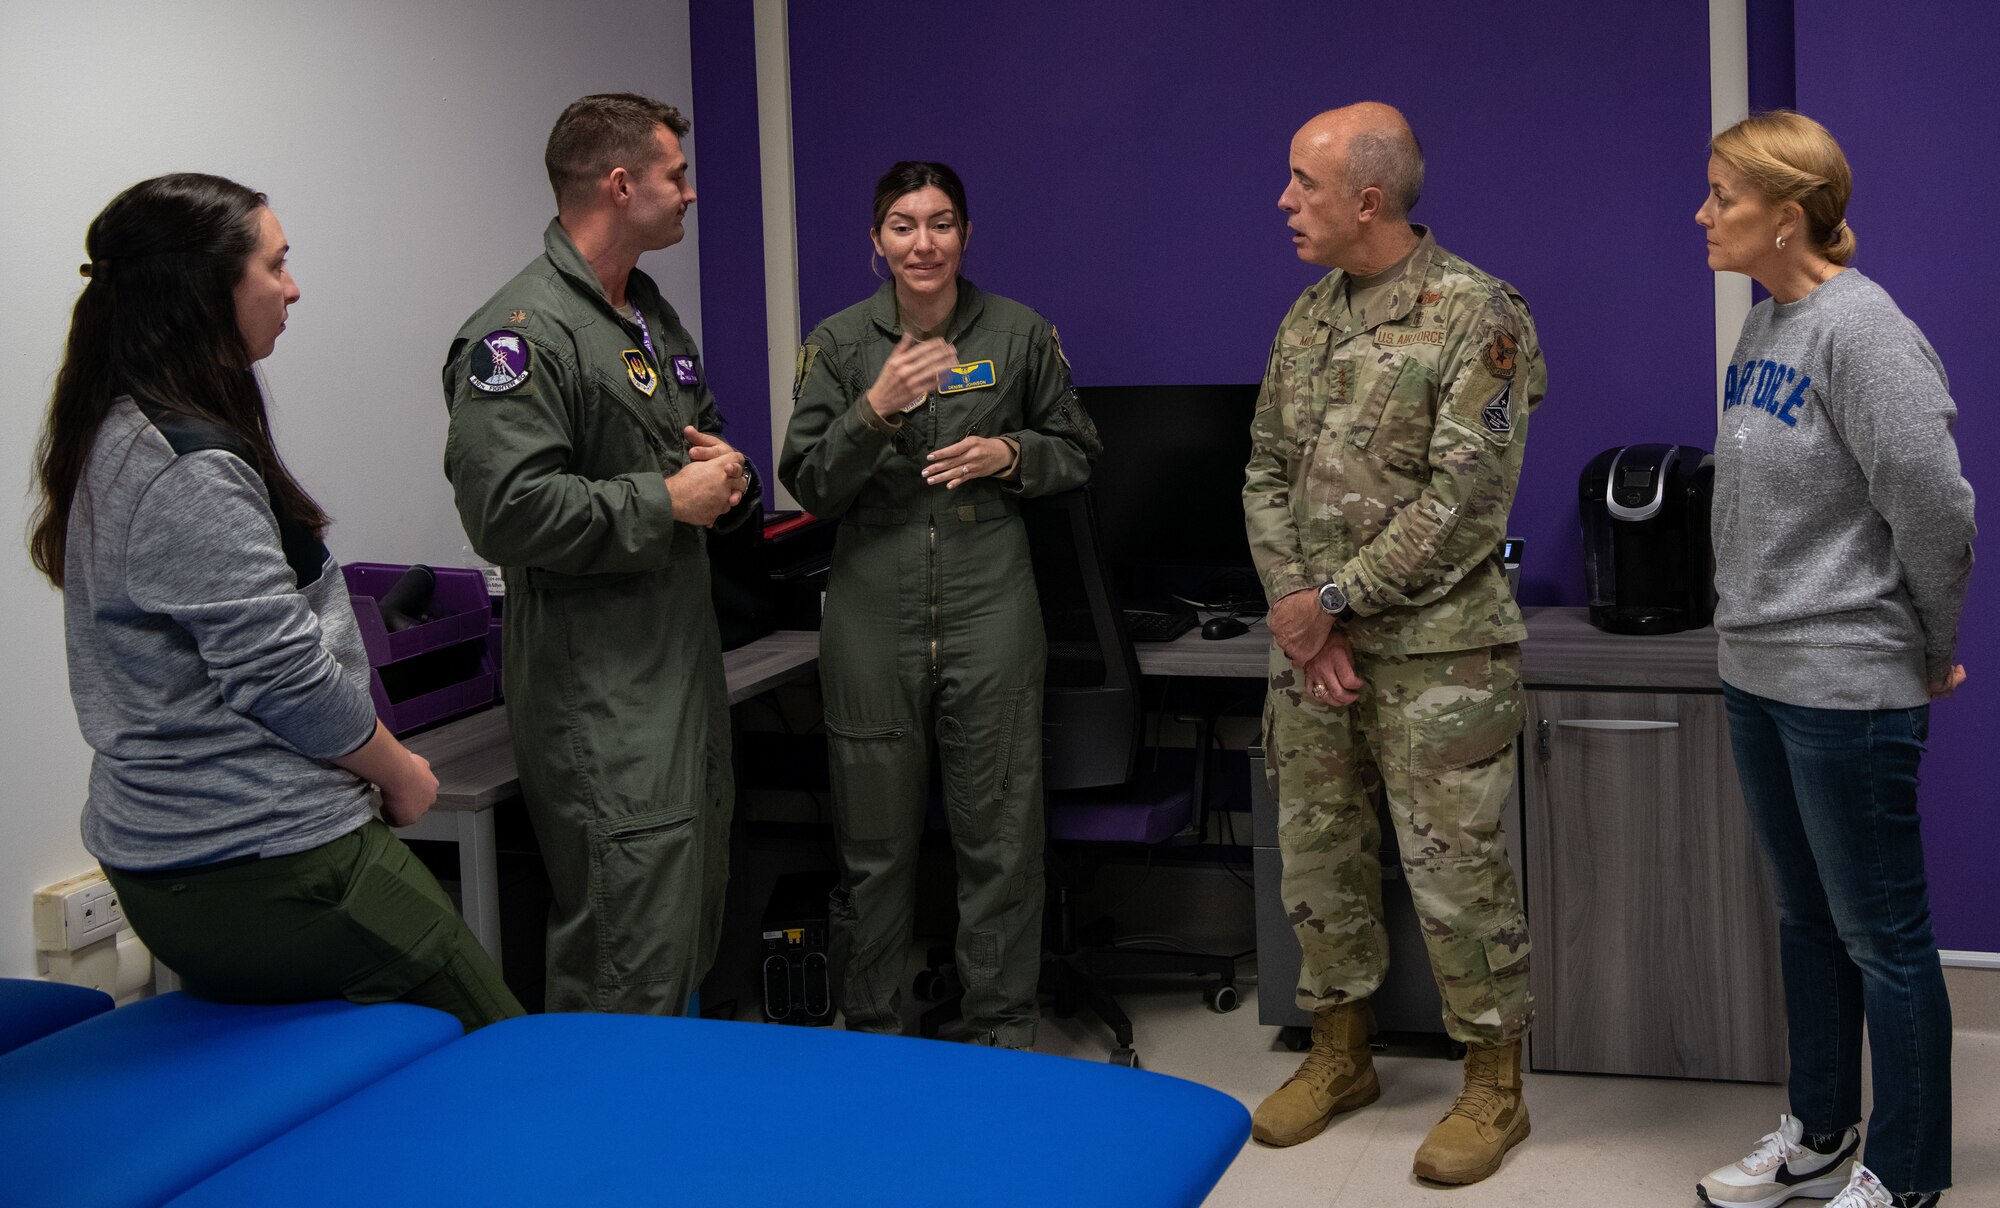 U.S. Air Force Lt. Gen. Robert Miller, Surgeon General of the Air Force, and Chief Master Sgt. Dawn Kolczynski, Medical Enlisted Force and Enlisted Corps Chief, visit the 510th Fighter Squadron (FS) at Aviano Air Base, Italy, Nov. 9, 2022. The 510th FS recently completed a room where physicians assigned to the squadron treat pilots for heath conditions, increasing their health, longevity and performance. (U.S. Air Force photo by Airman 1st Class Thomas Calopedis)